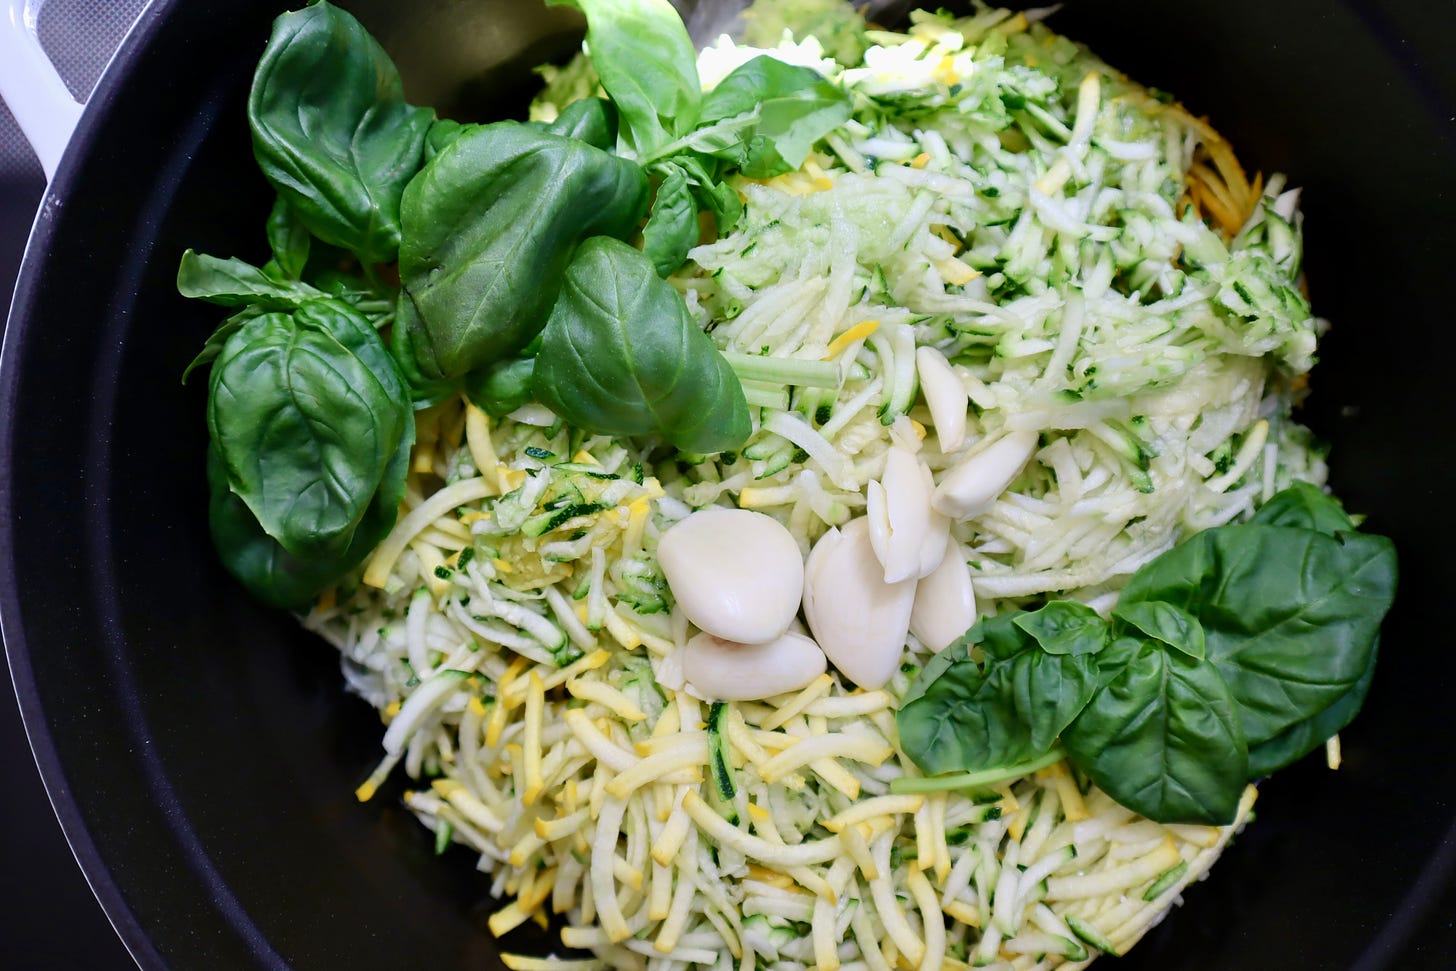 Large pot with shredded zucchini, peeled garlic cloves, and whole leaves of basil.